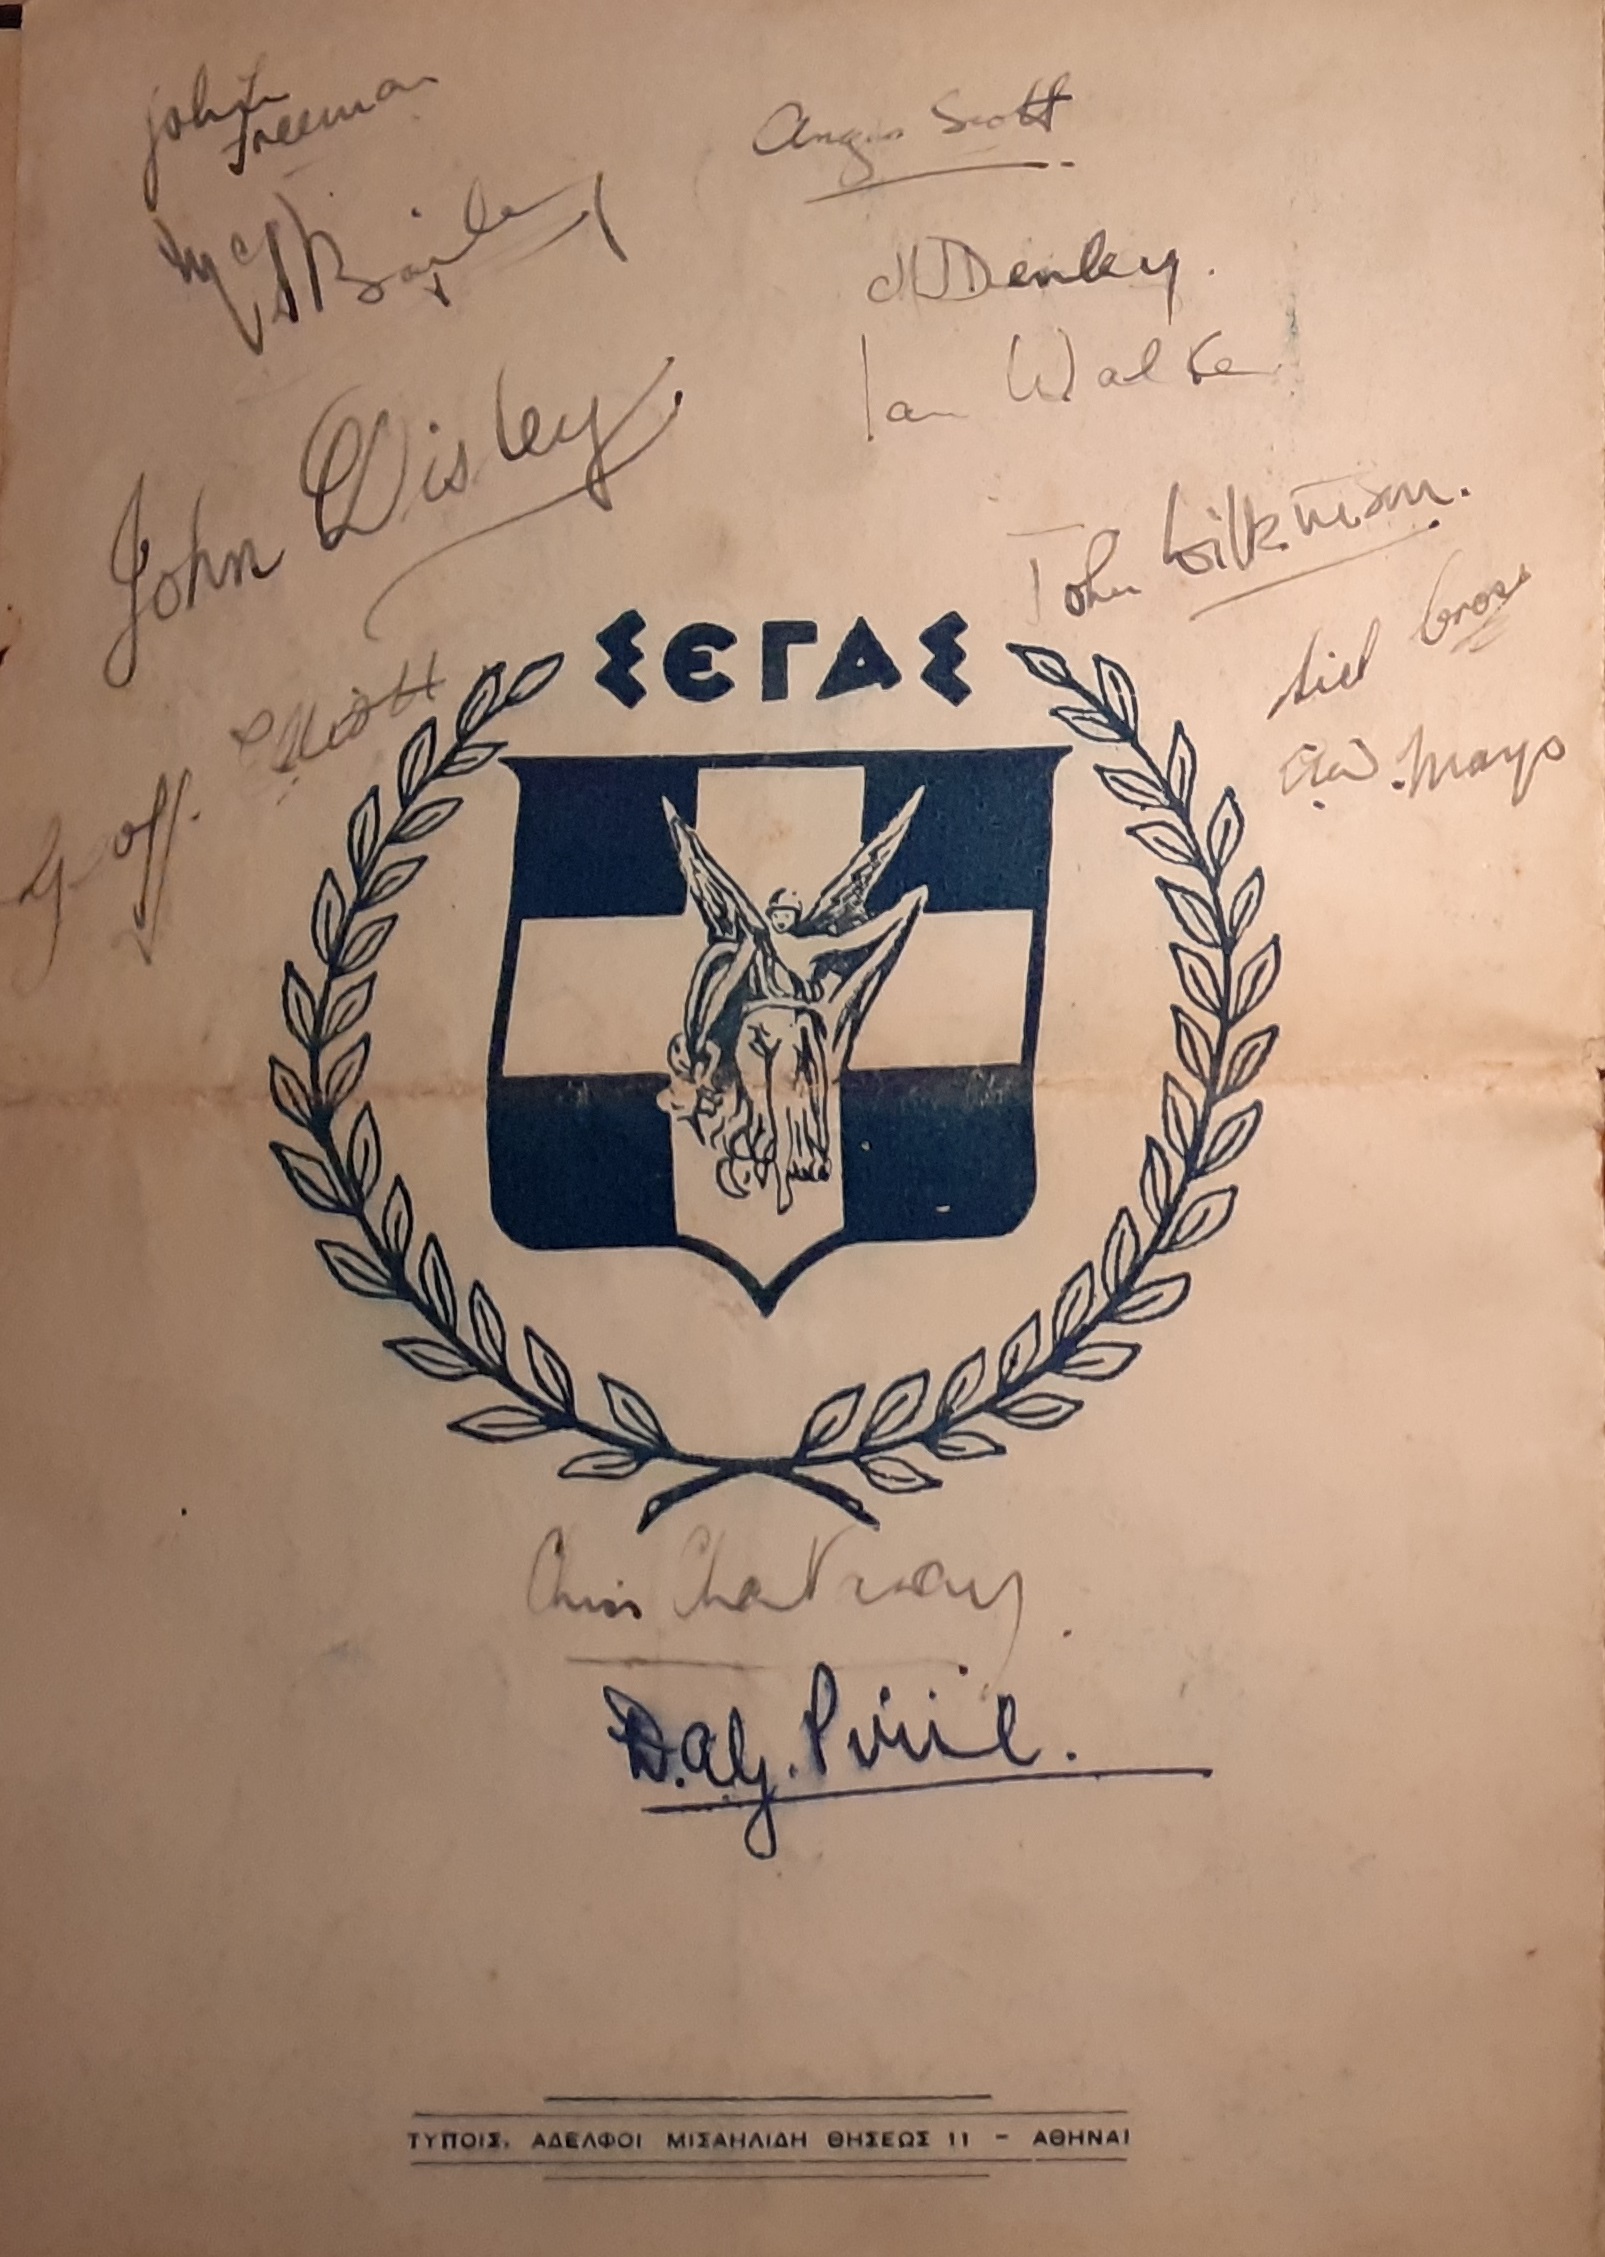 Paper athletics program, printed with blue laurel wreathes and signed by competitors